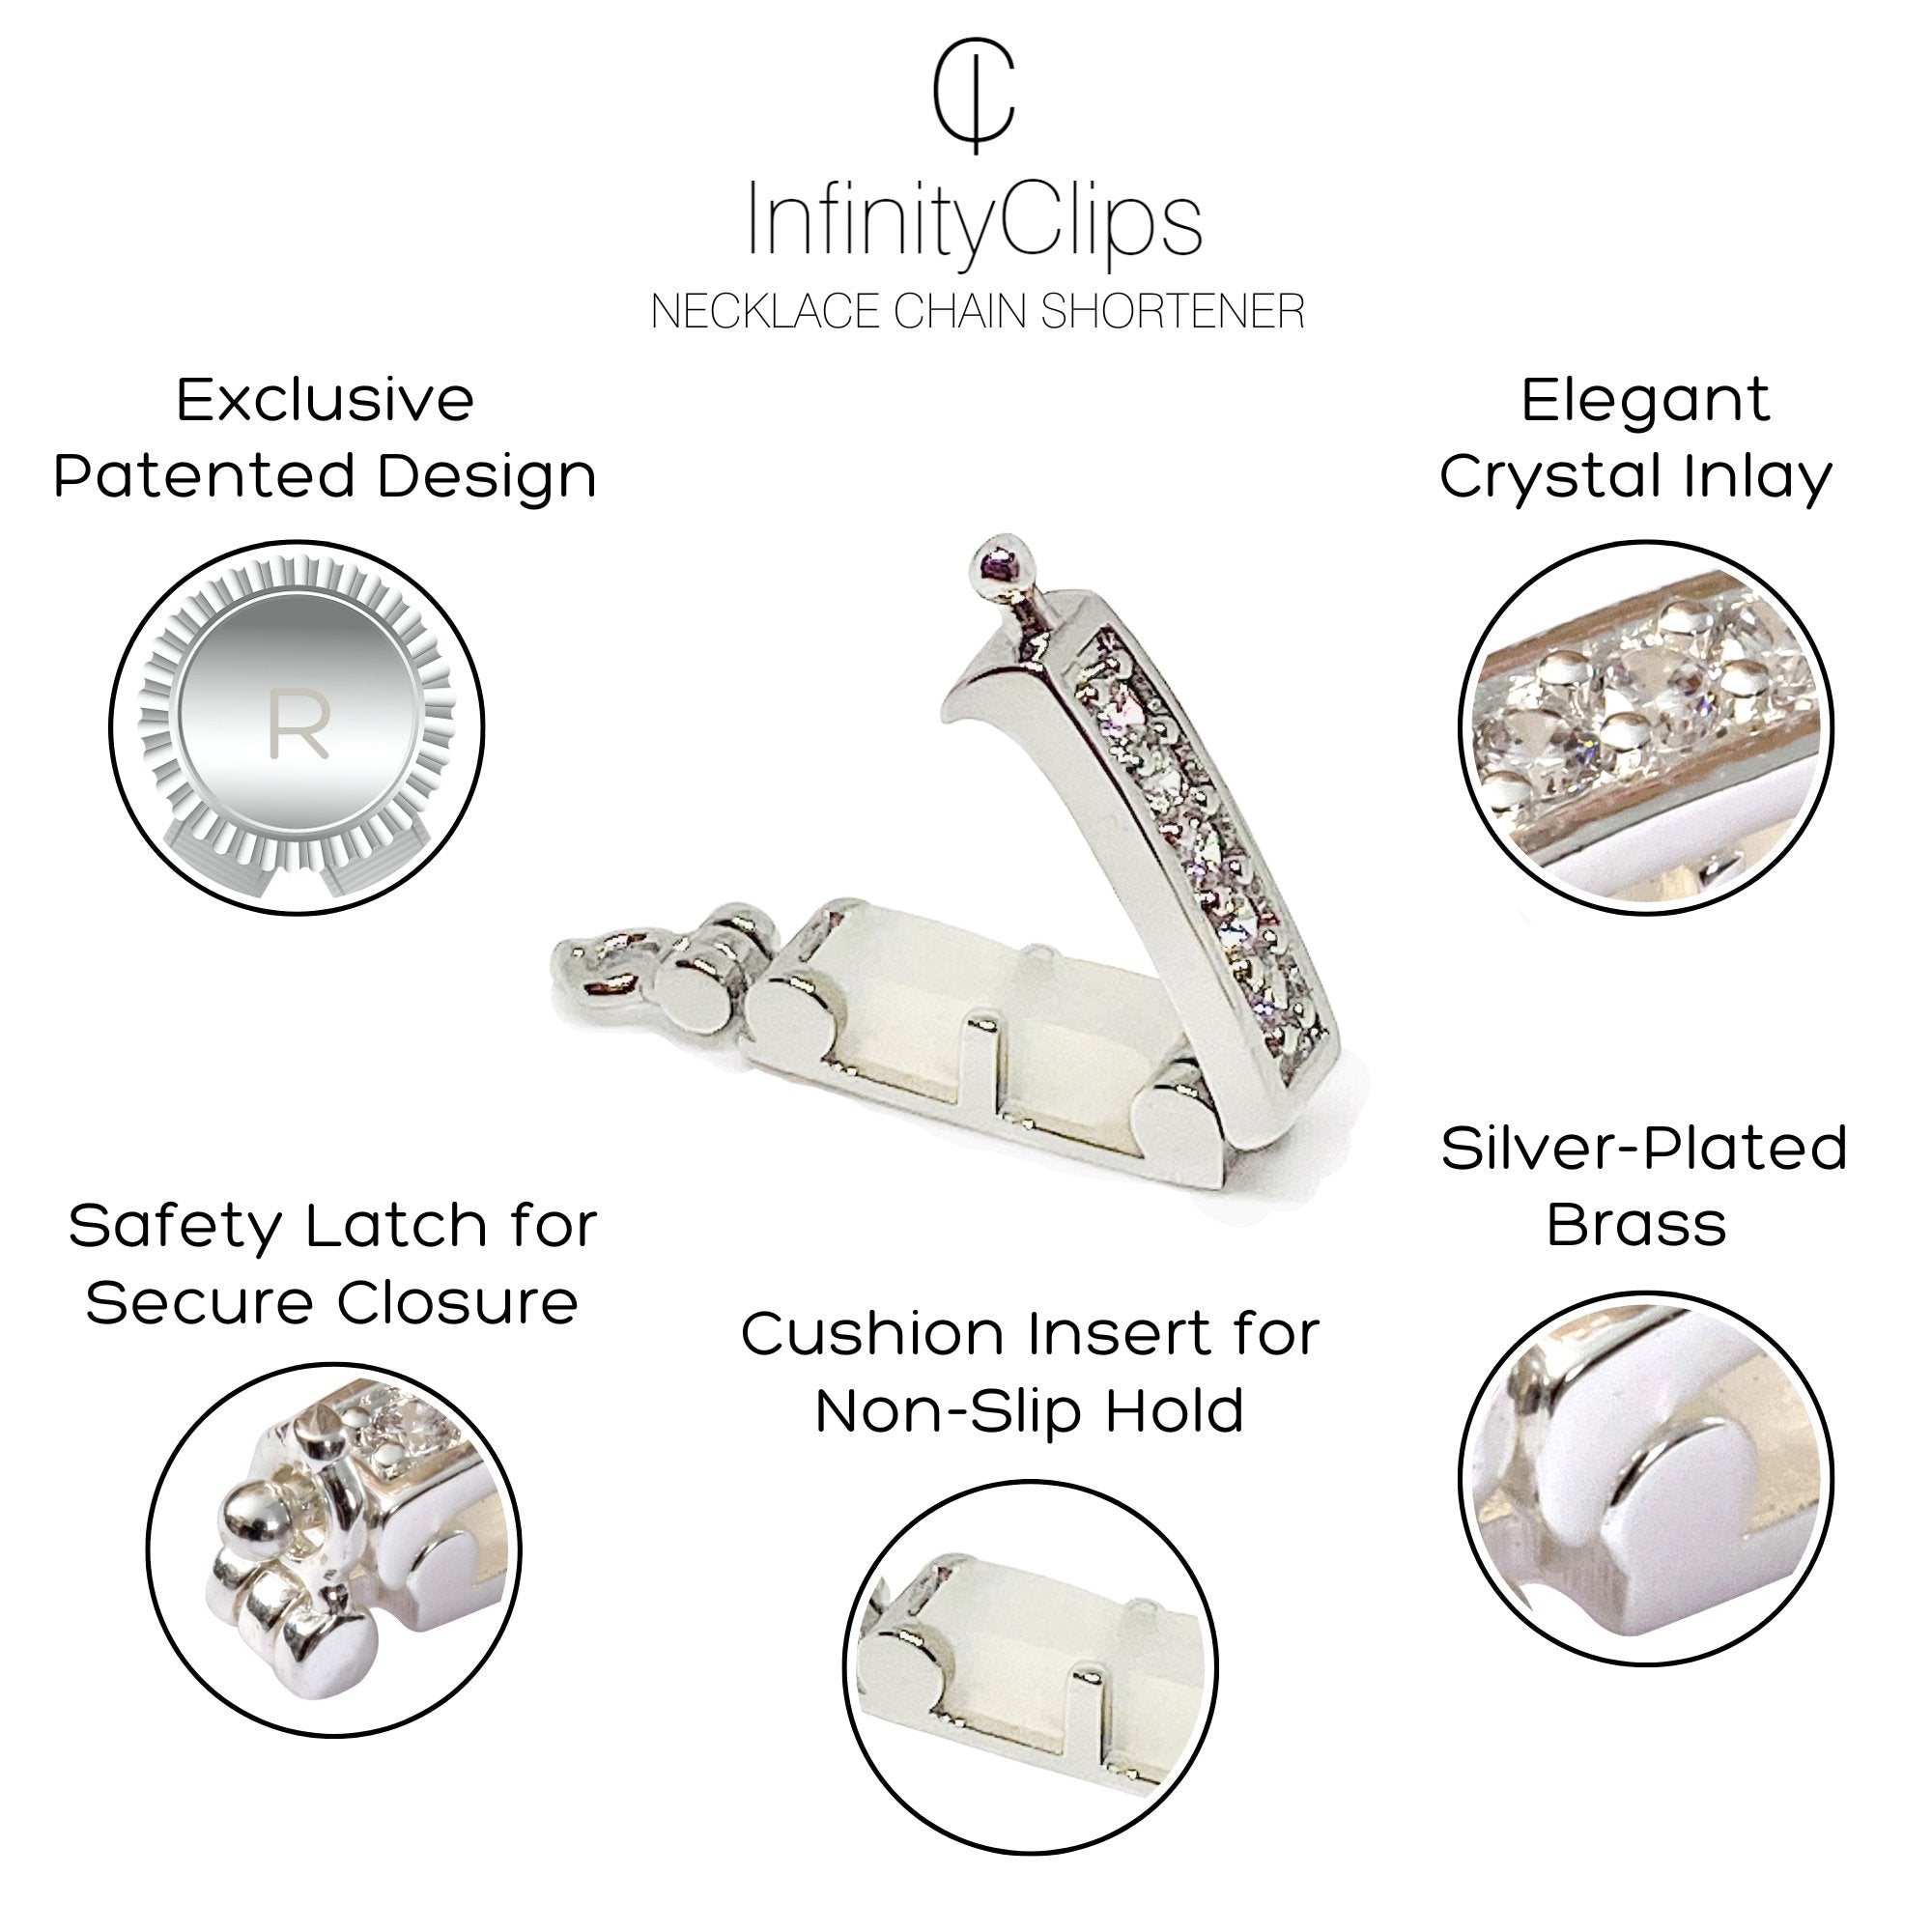 Small Classic Necklace Shortener | InfinityClips Silver